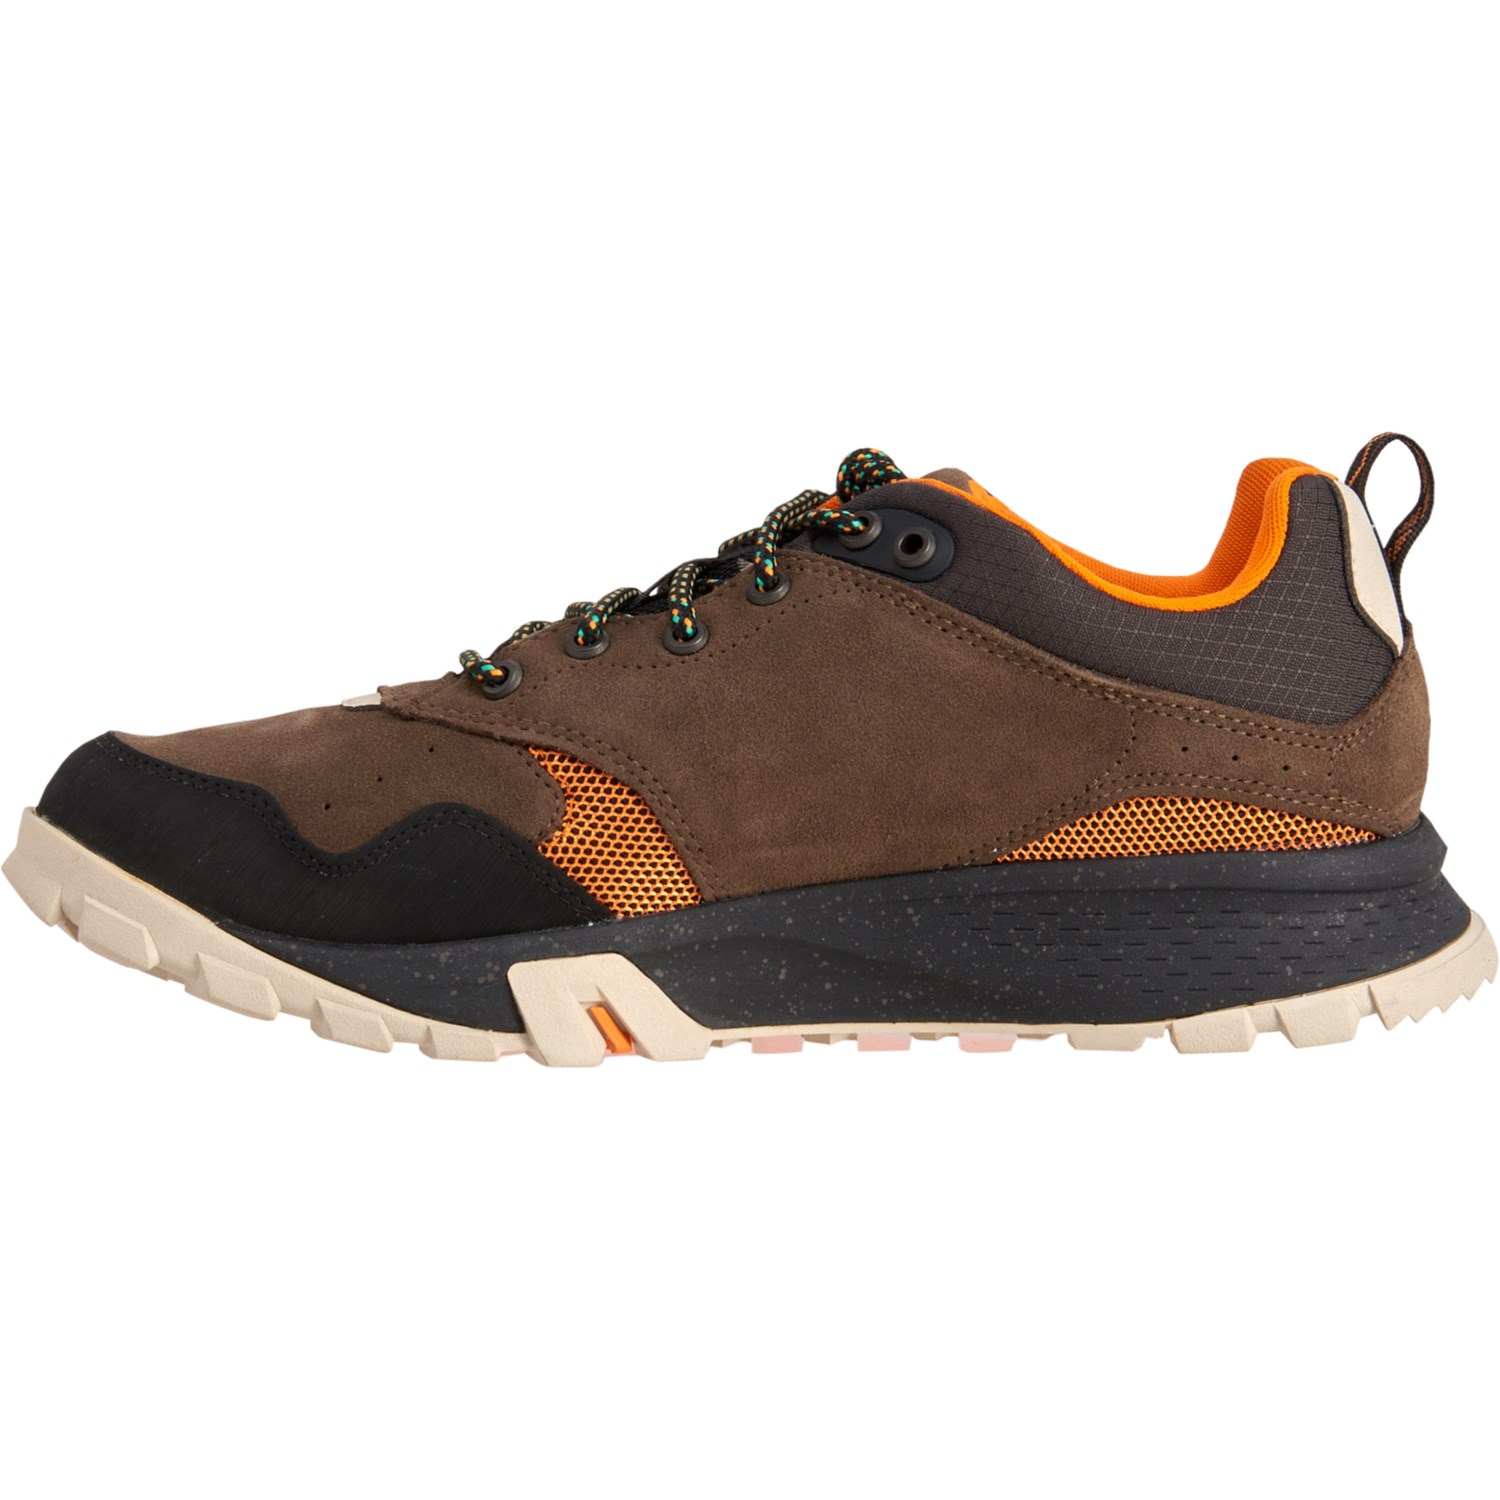 Timberland Garrison Trail Low Hiking Shoes (For Men) - Save 40%